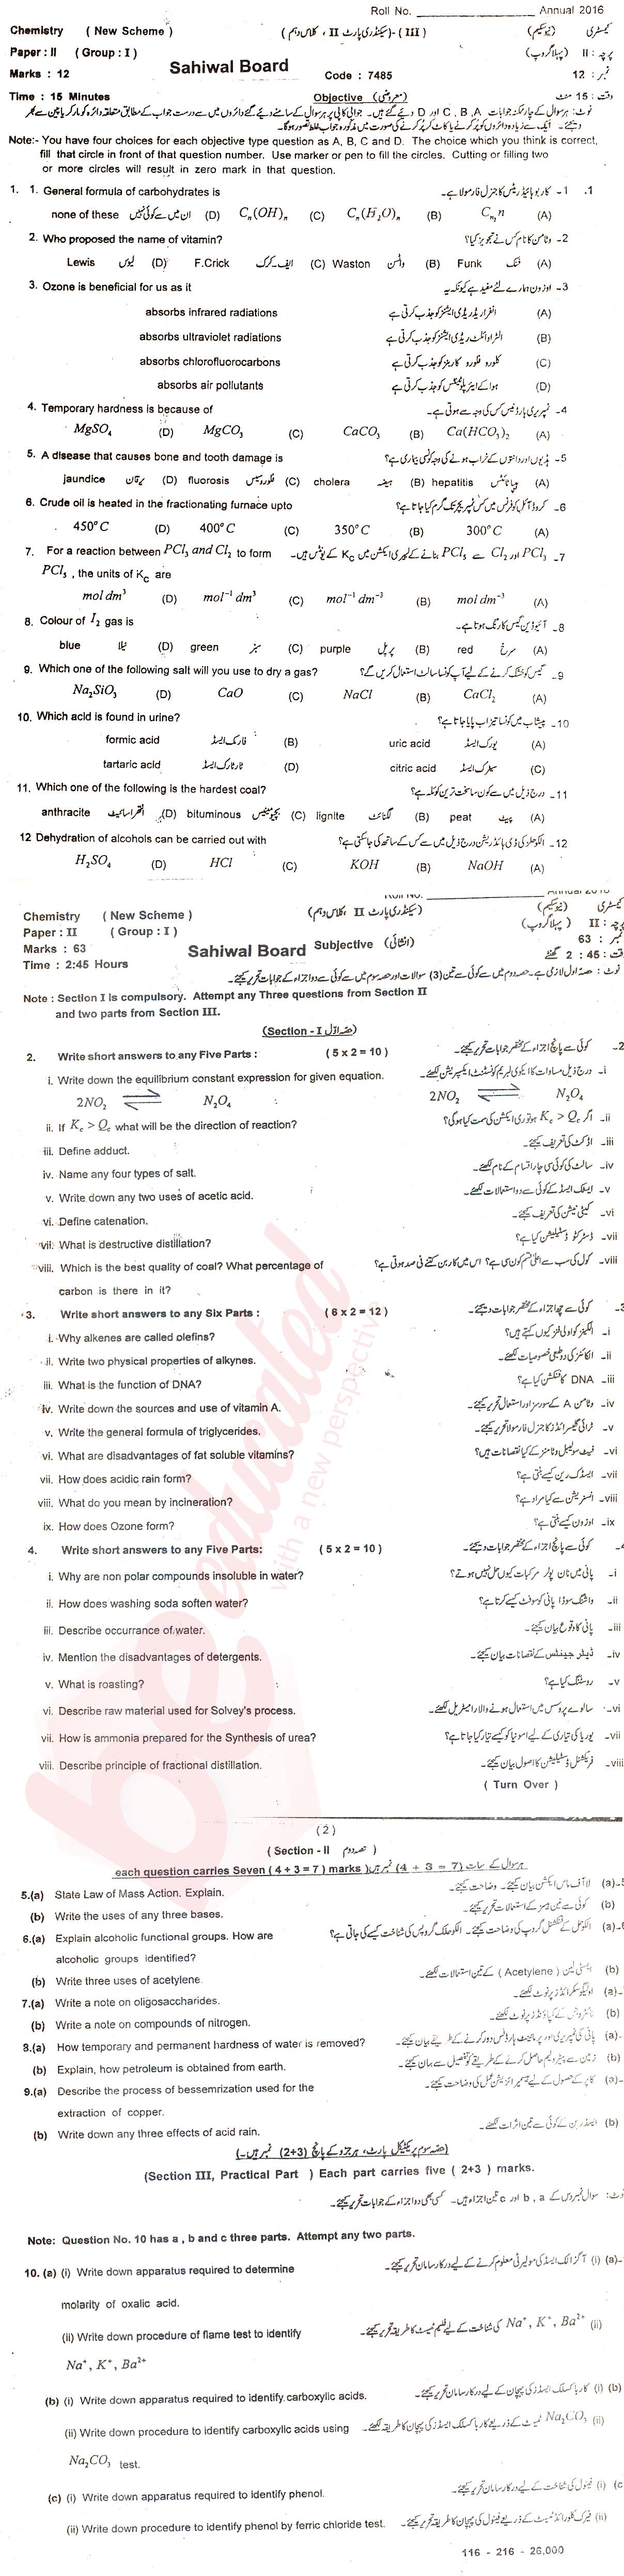 Chemistry 10th class Past Paper Group 1 BISE Sahiwal 2016